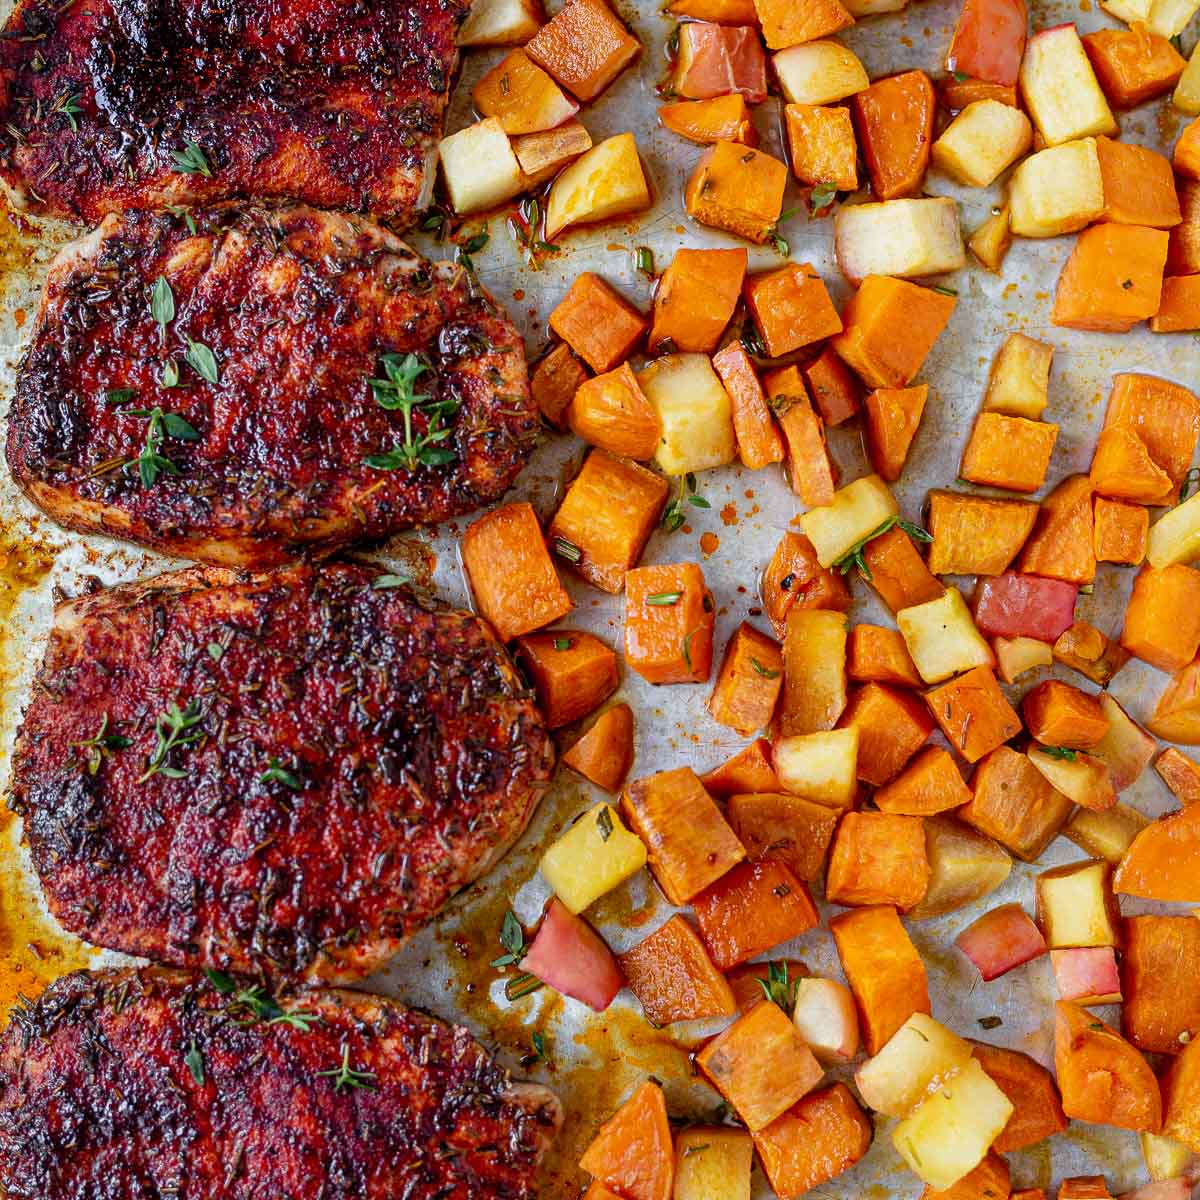 Does it Take Longer to Cook Sweet Potatoes?